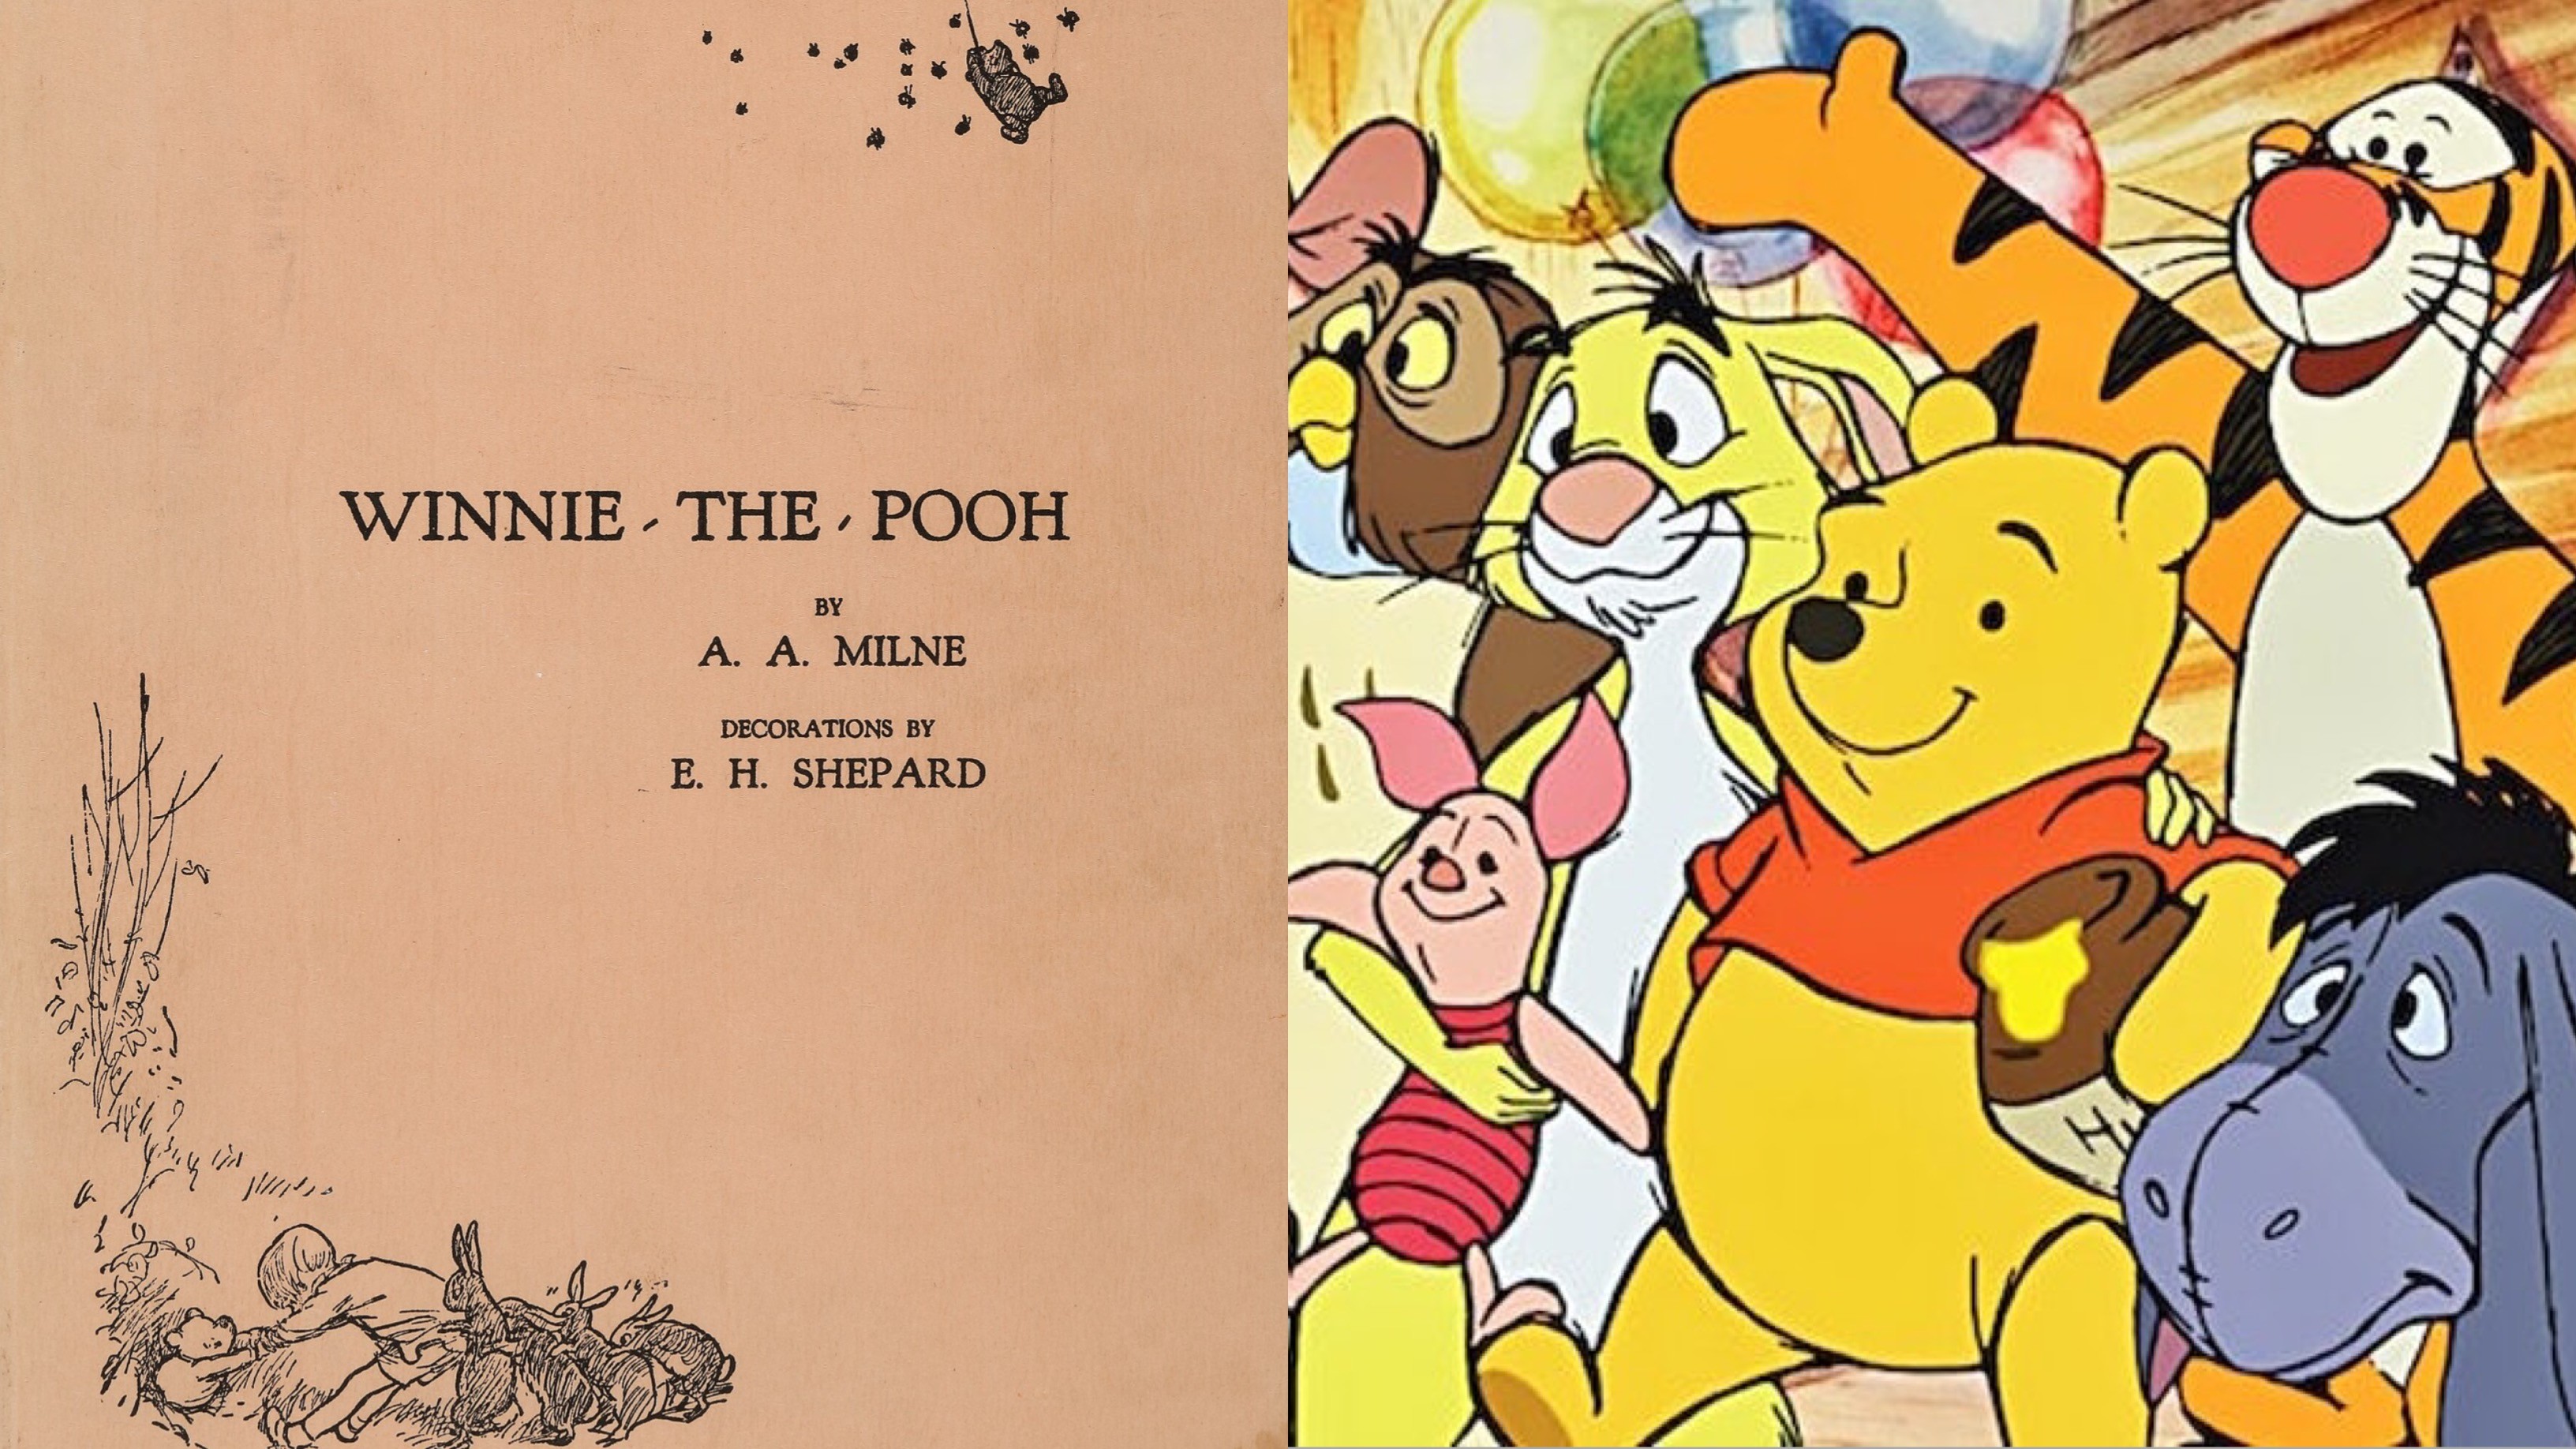 Winnie-The-Pooh' Officially Enters Public Domain; What This Means For Disney  - The DisInsider